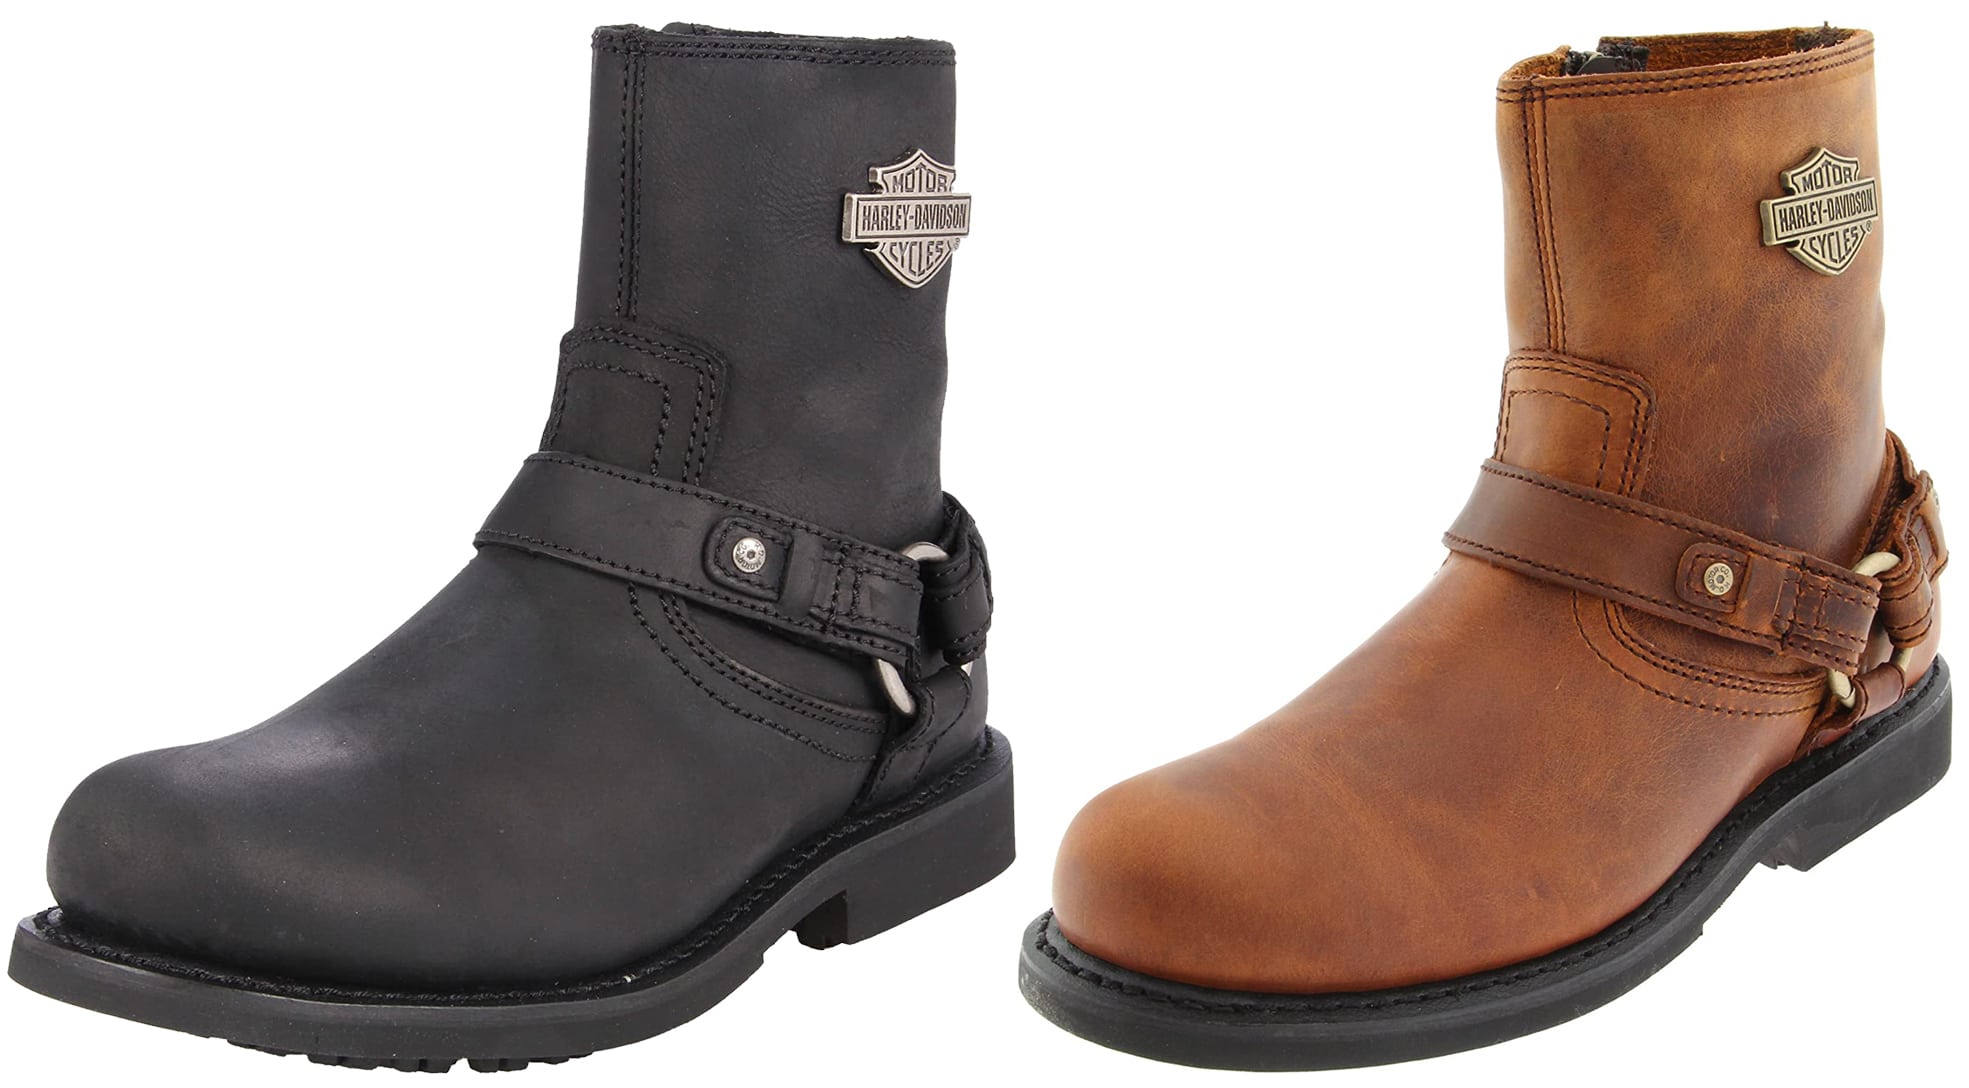 The Scout is a moto-inspired boot with a three-strap harness, metallic hardware ring, and a logo applique on the shaft